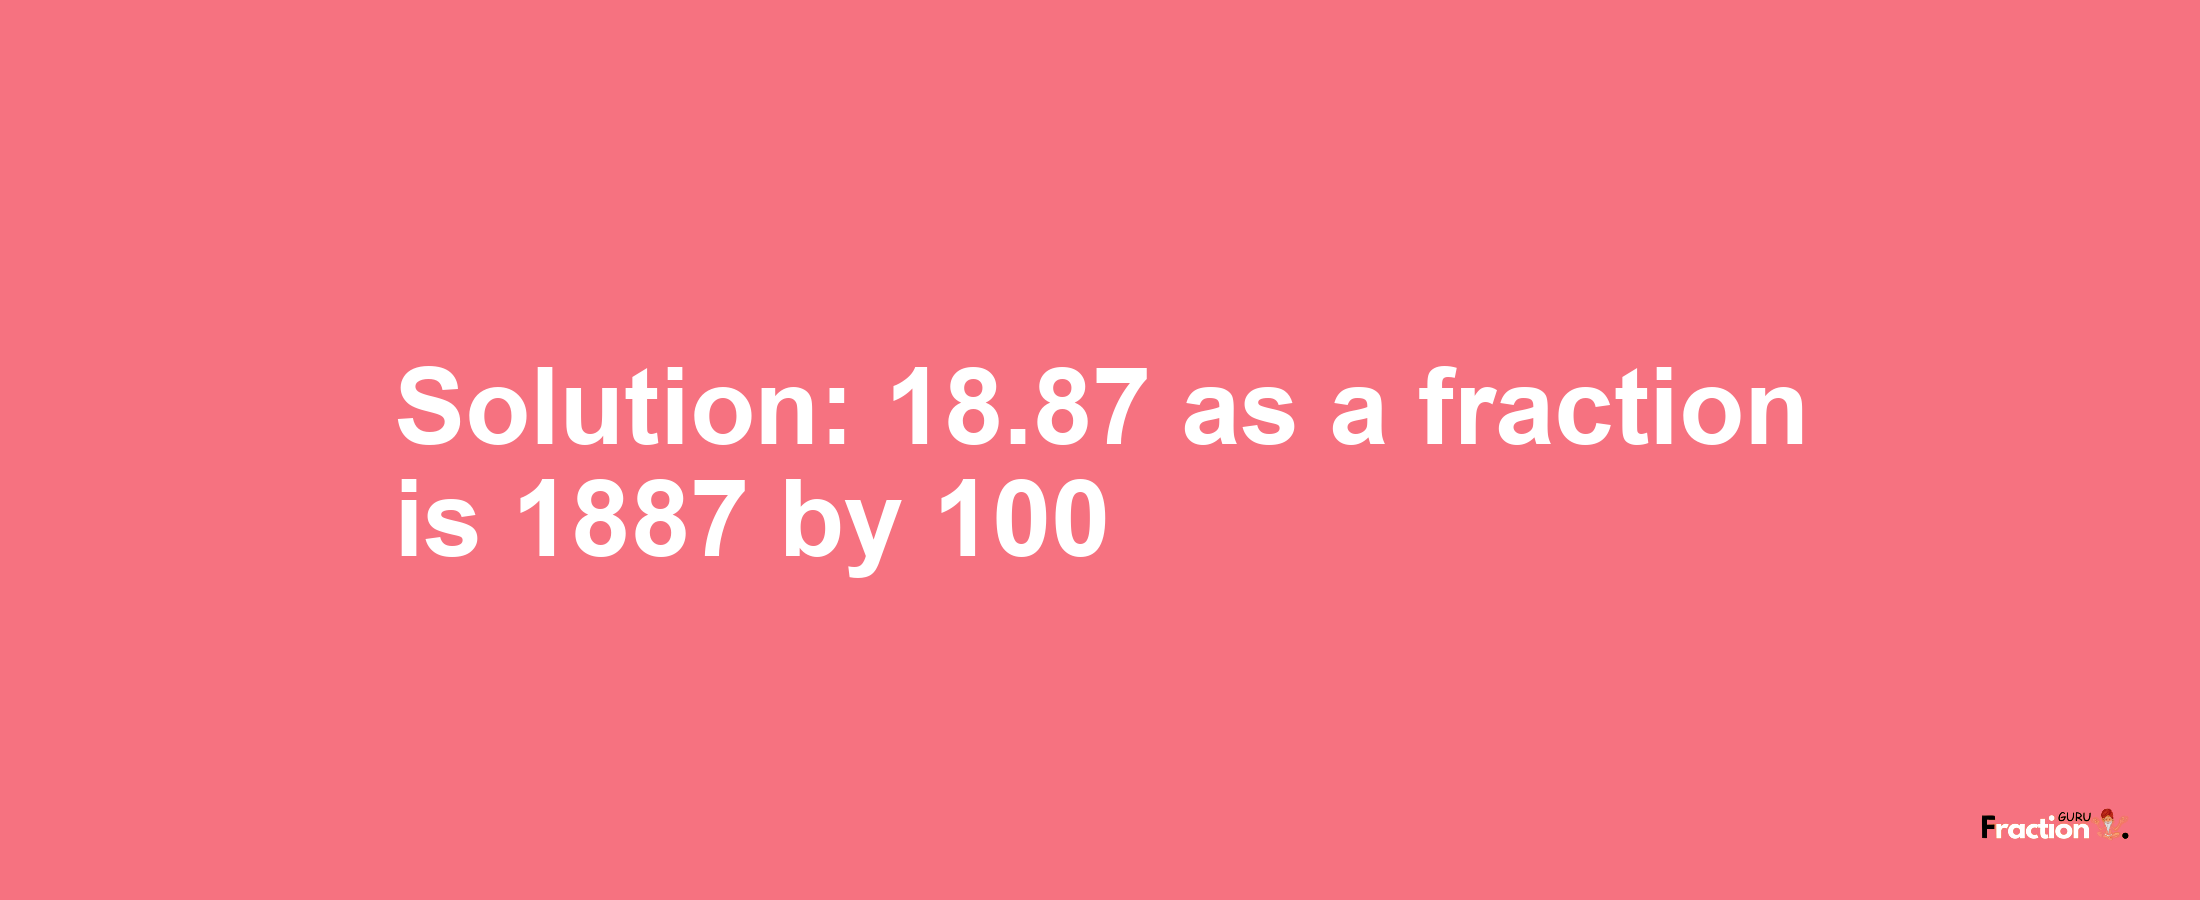 Solution:18.87 as a fraction is 1887/100